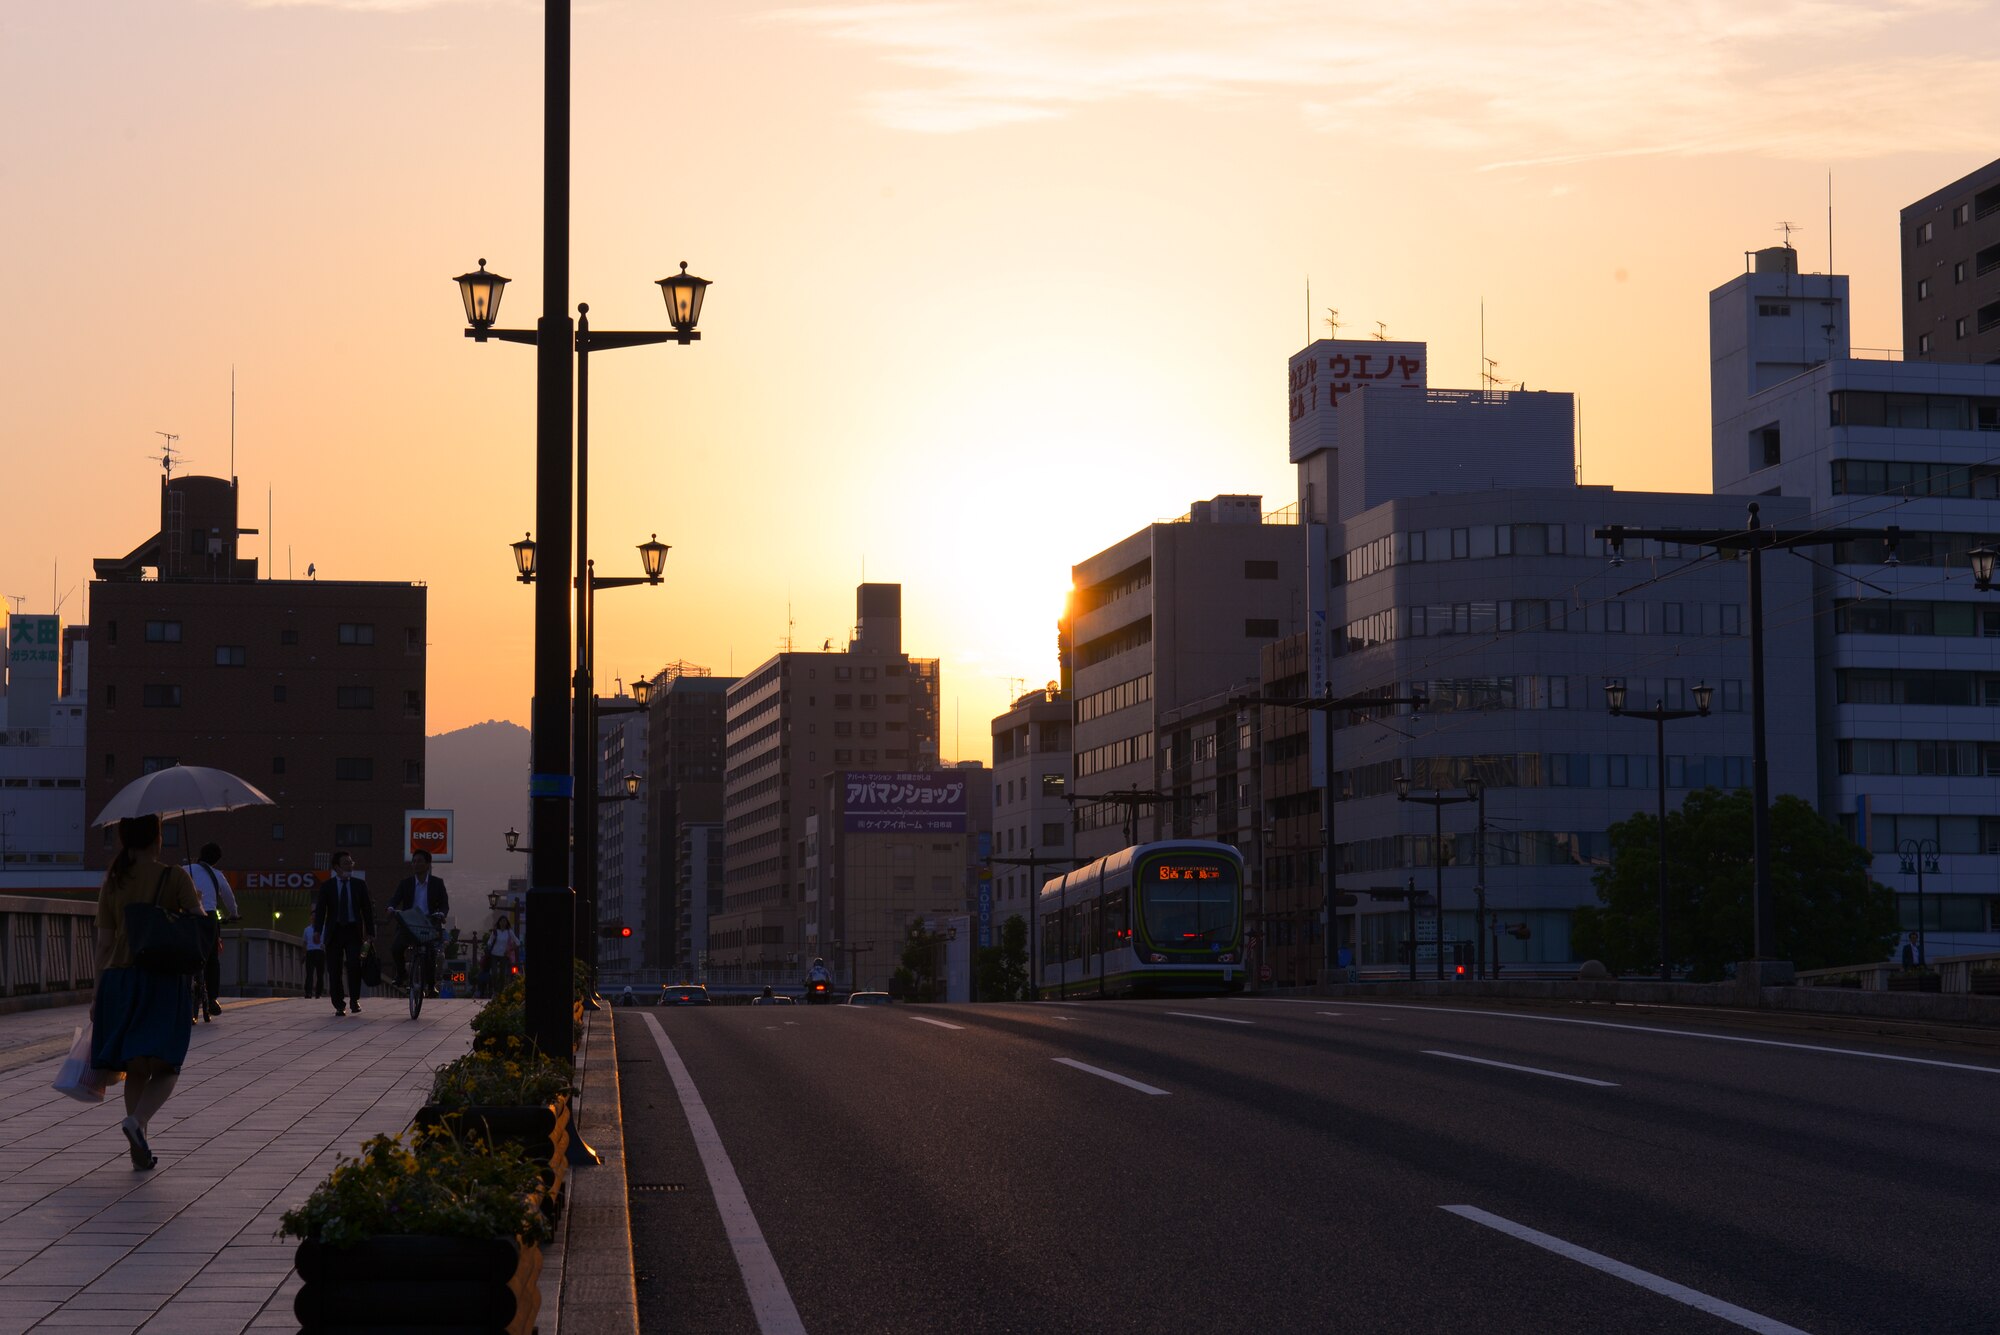 The sun sets on Hiroshima, Japan, May 31, 2016. Hiroshima’s population has swelled more than three times in the 71 years since the end of World War II. (U.S. Air Force photo by Airman 1st Class Elizabeth Baker/Released)